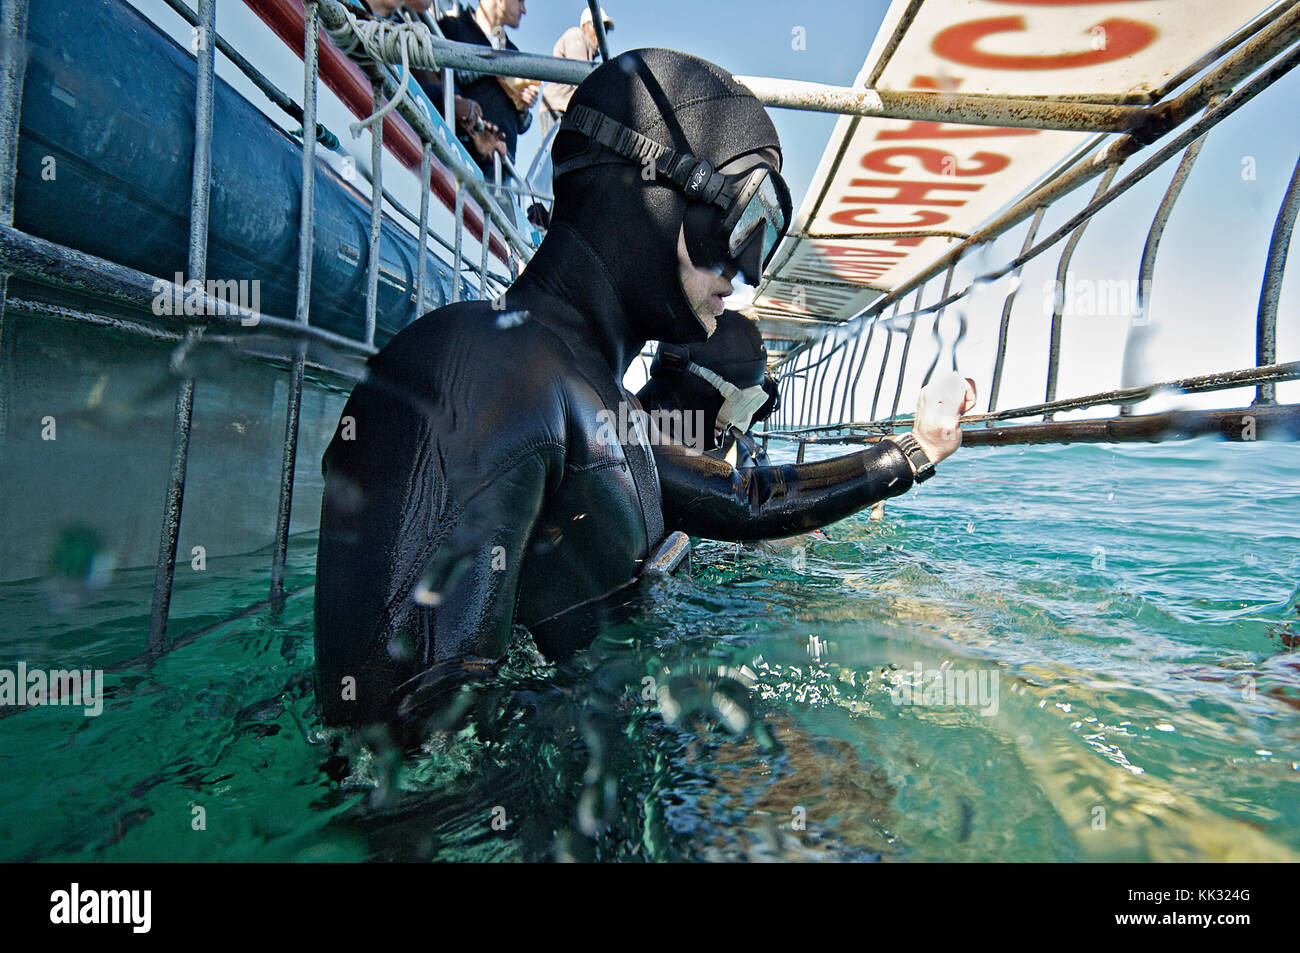 A tourist inside a great white shark view cage takes a breath as he is about to duck down under the water to view a shark as it swims by. Stock Photo